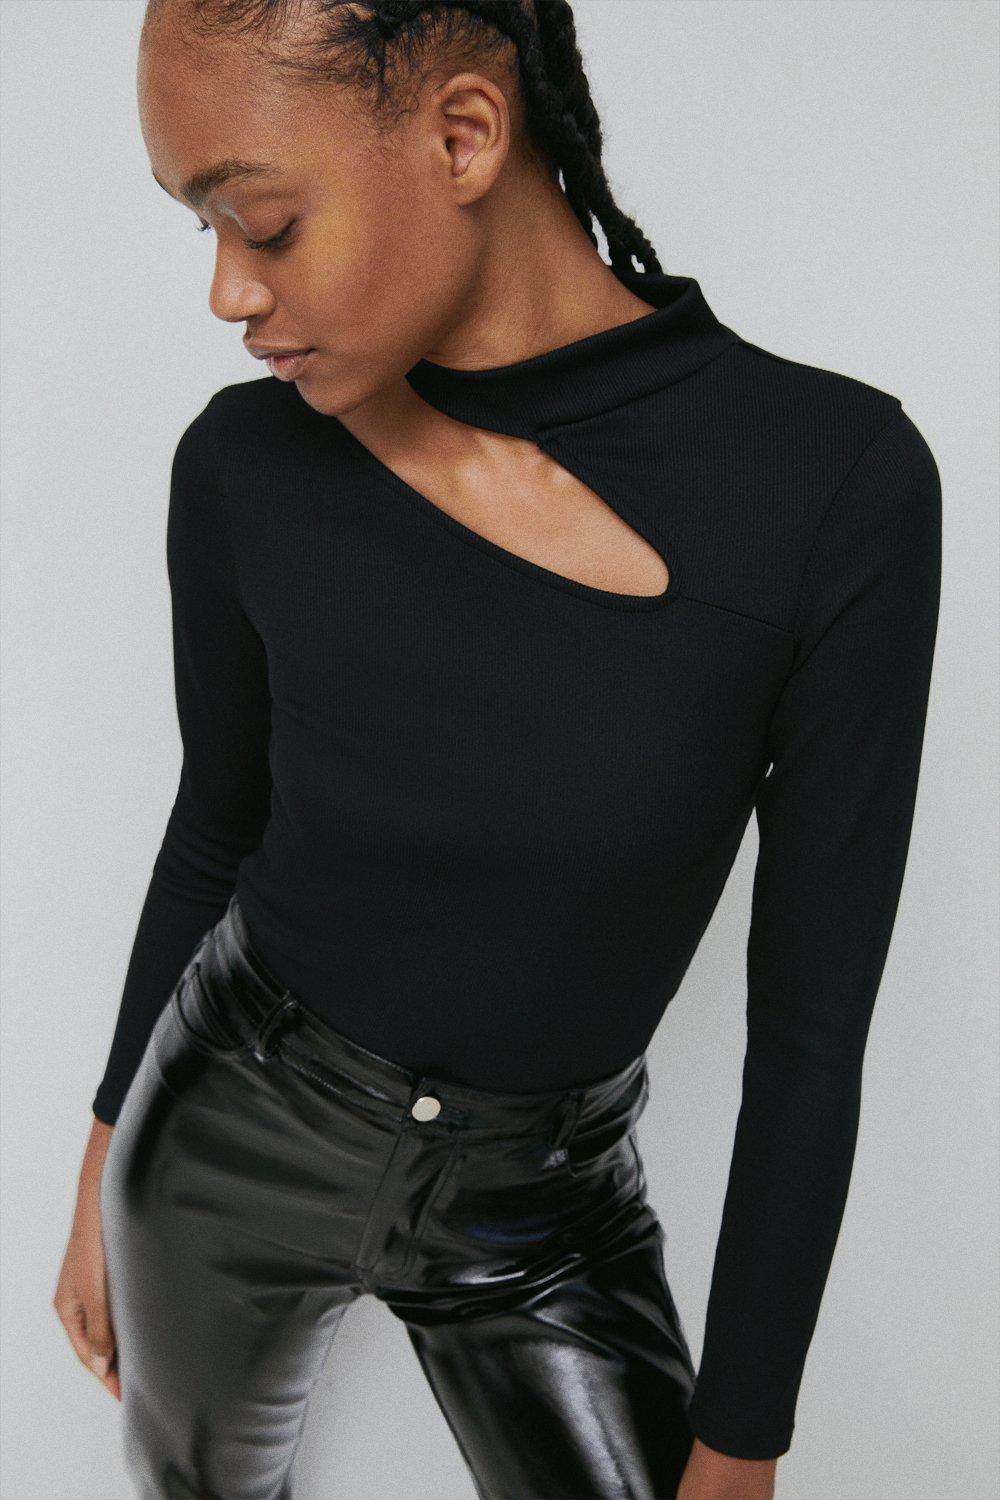  Rpvati Going Out Tops For Women Asymmetric Neck Long